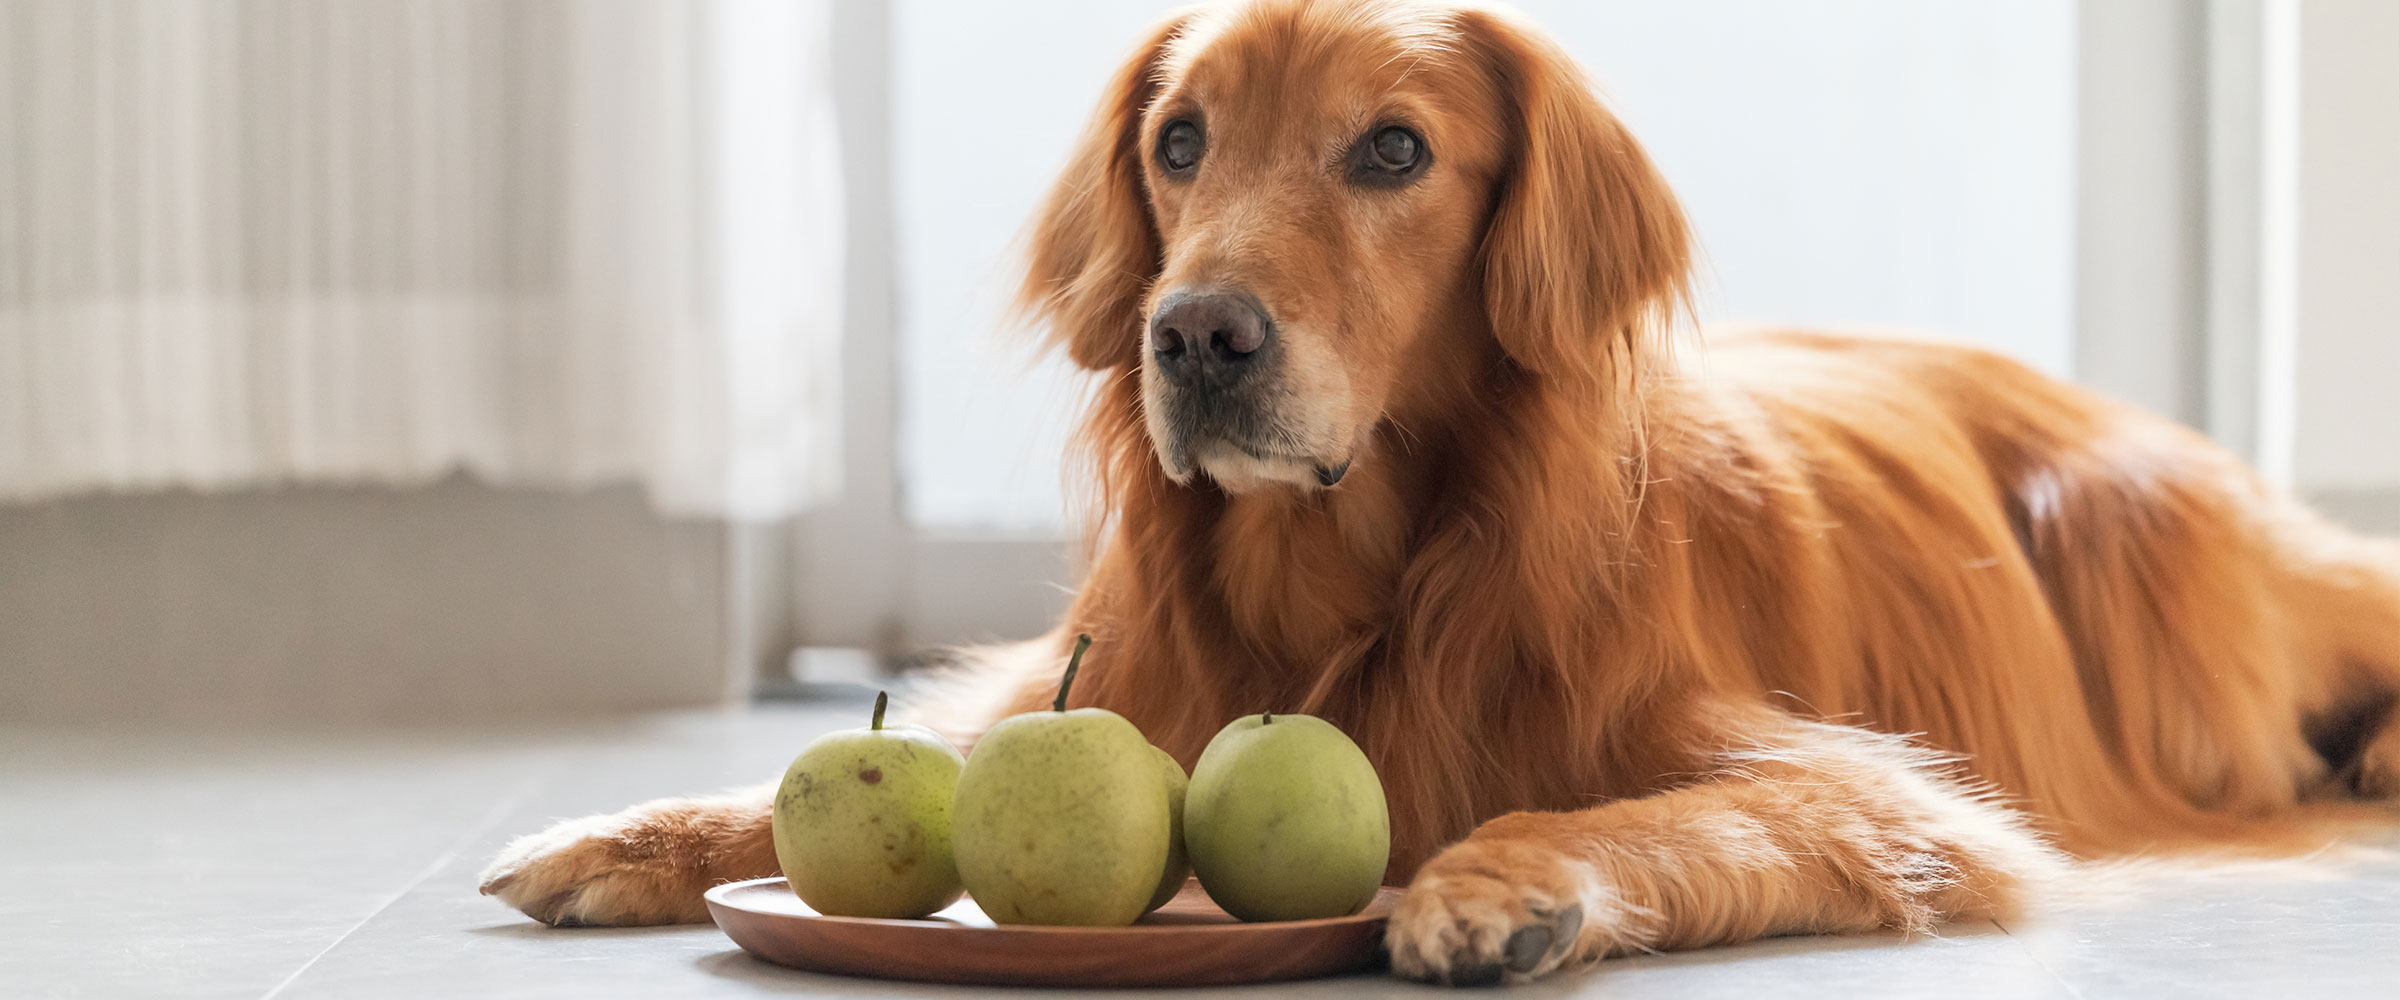 dog_and_pear_2